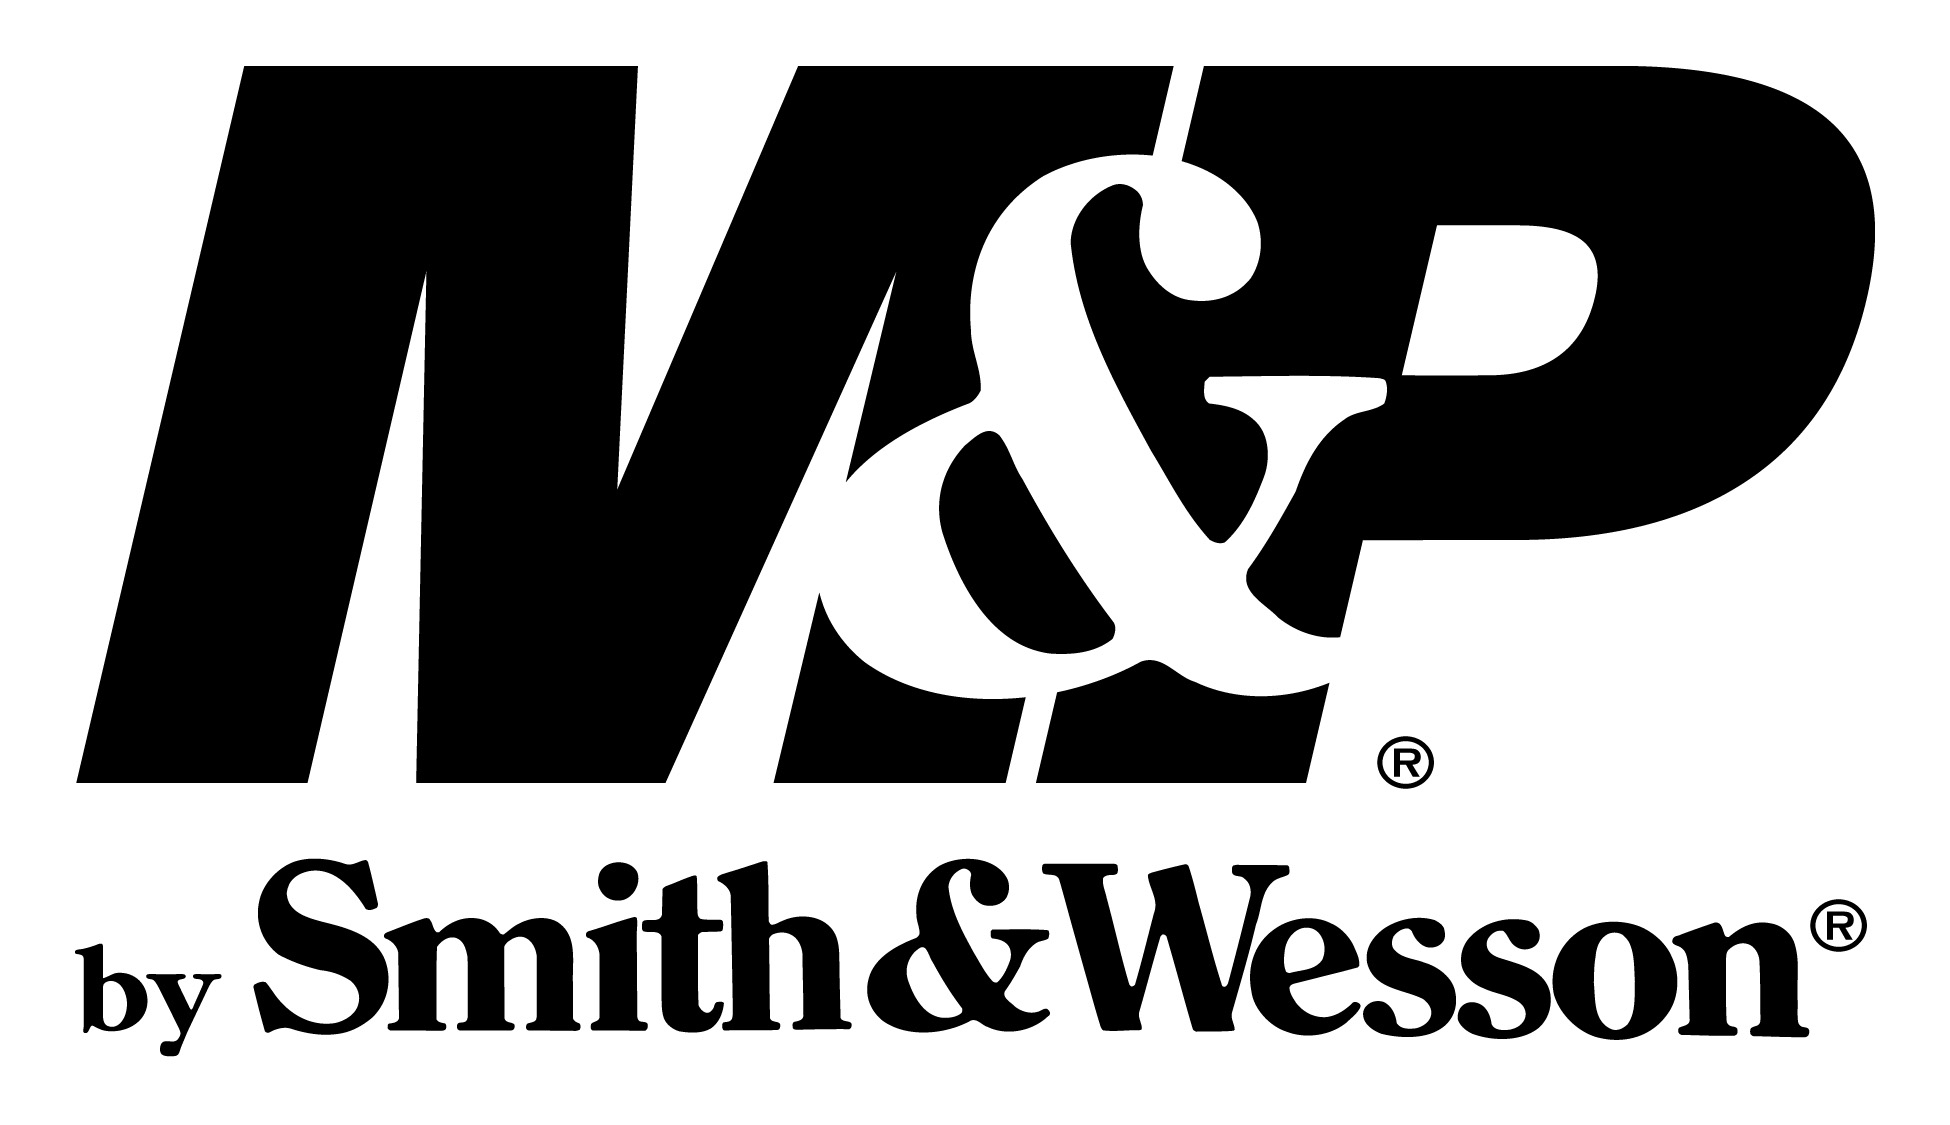 1950x1125 Smith and wesson Logos